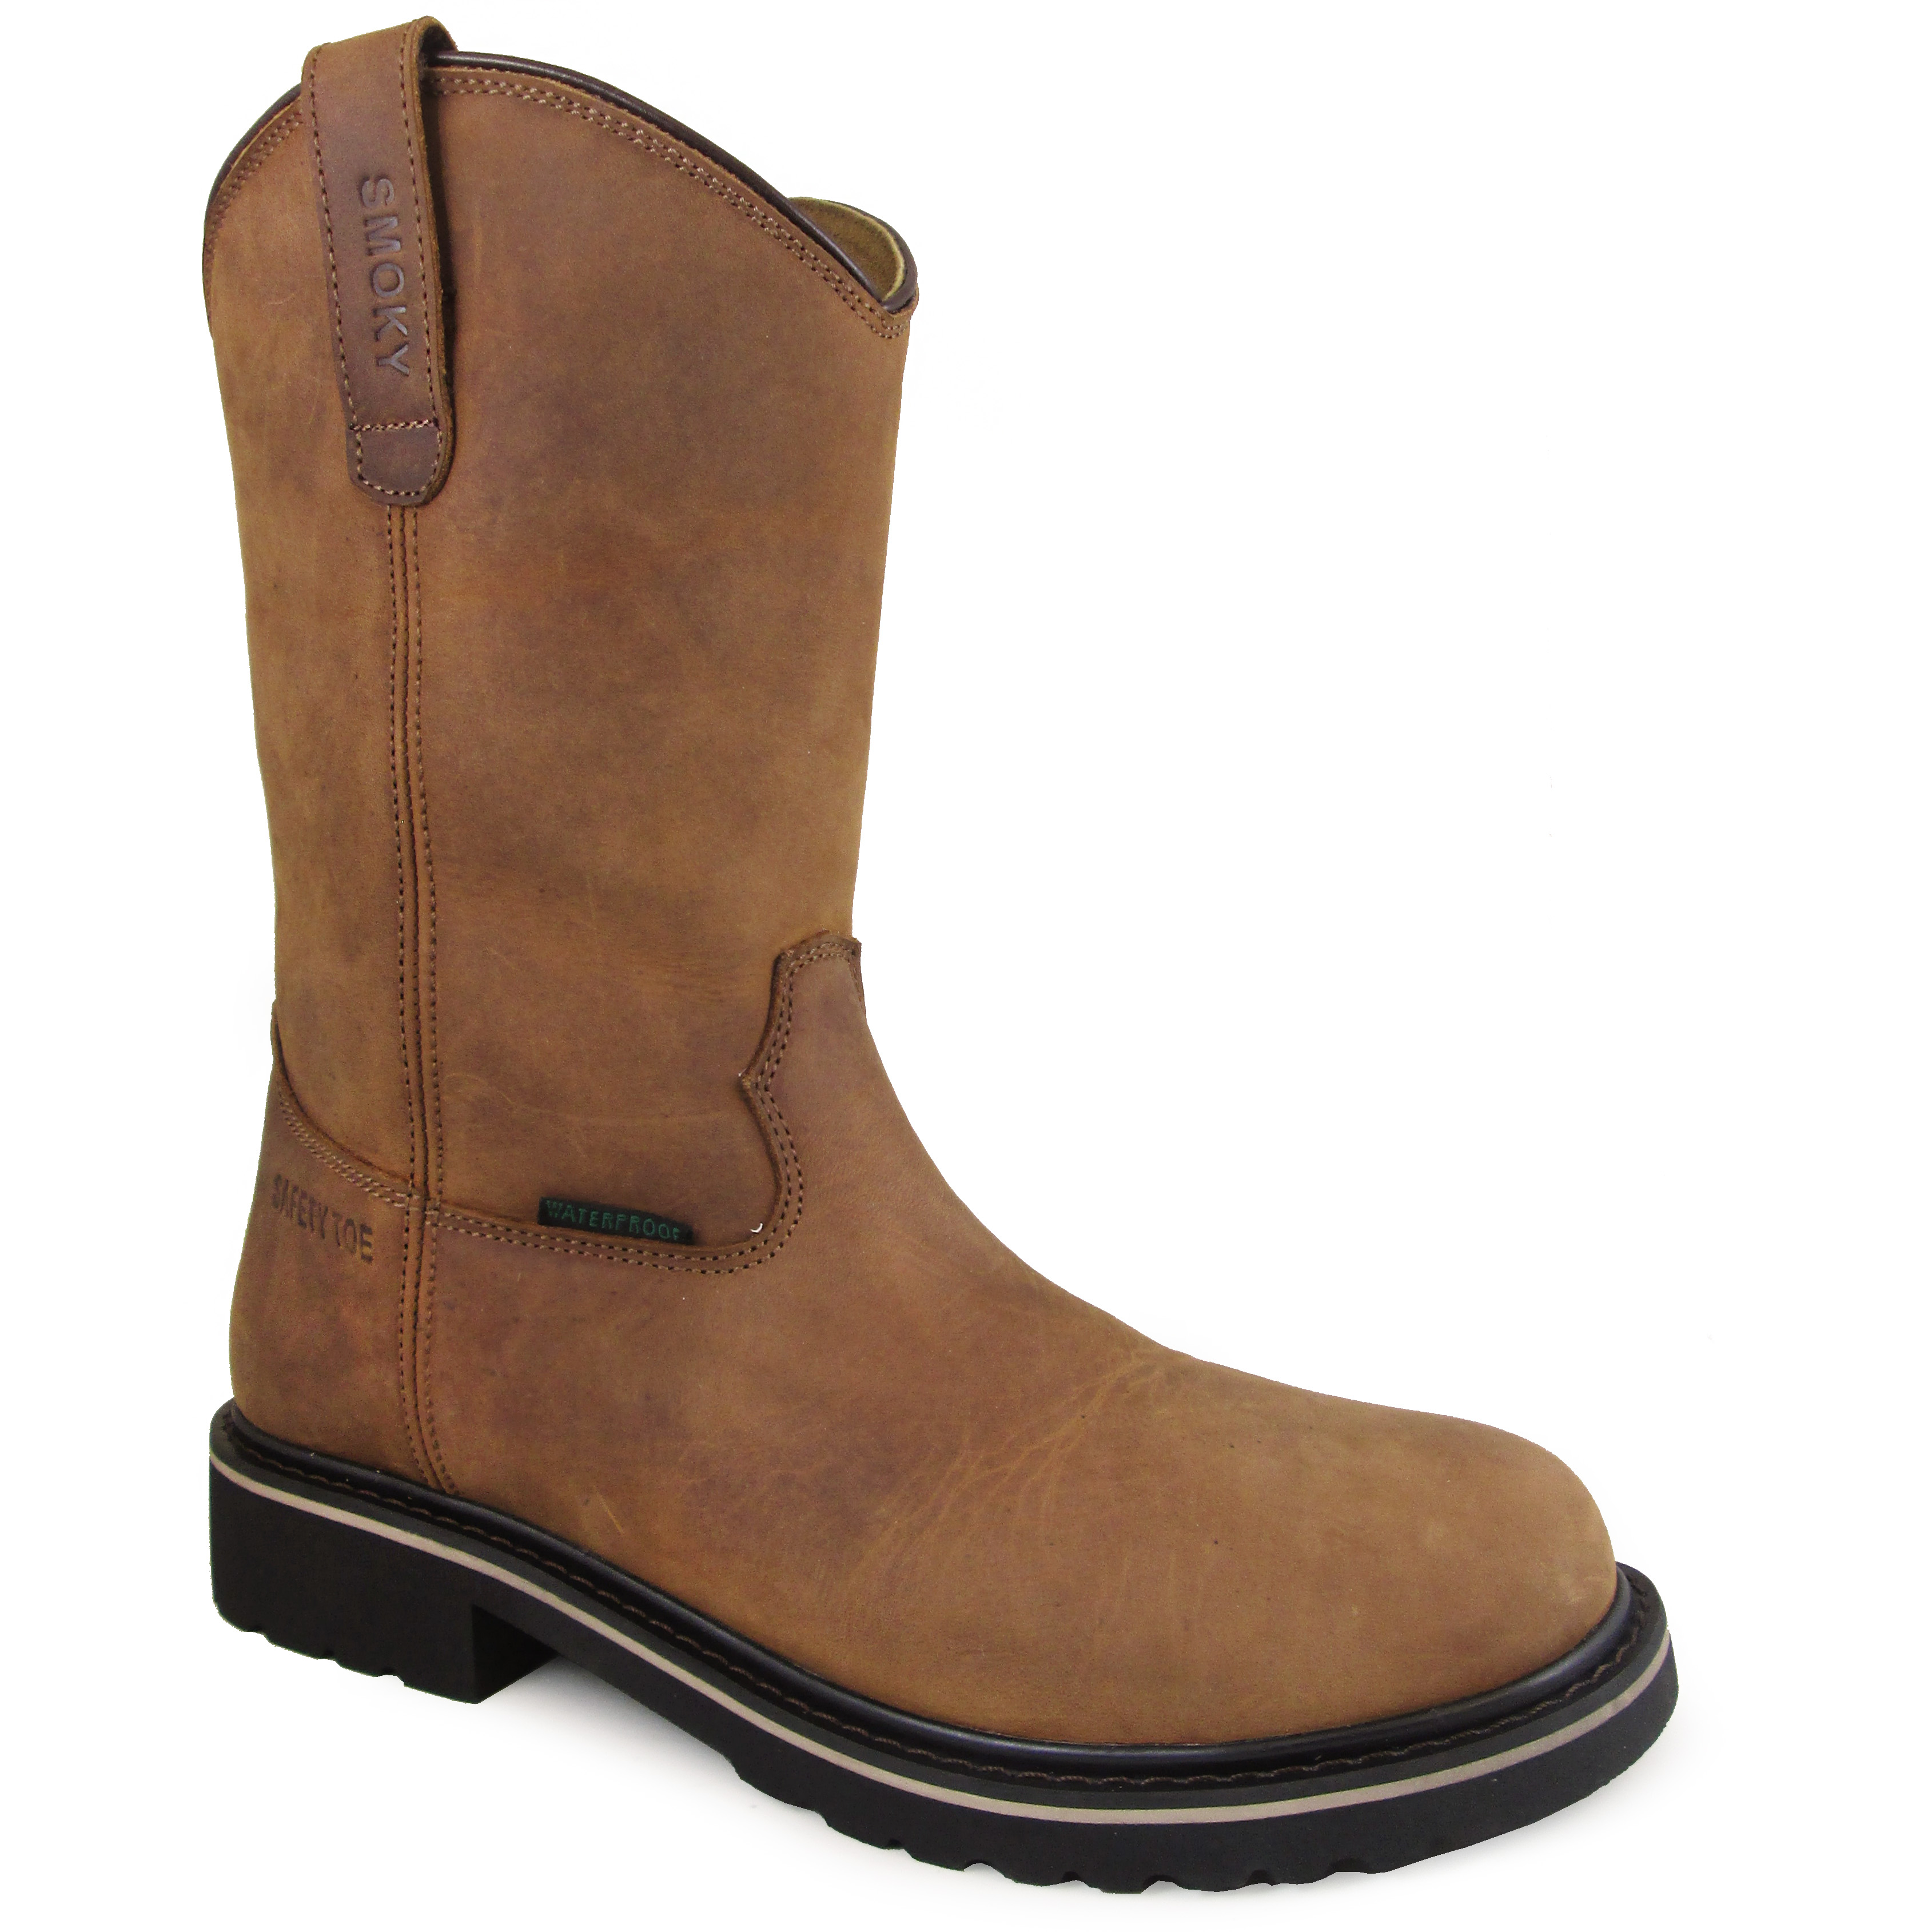 Smoky Mountain Boots Men's 4637 Scottsdale 10" Leather Wellington Work Boot - Brown